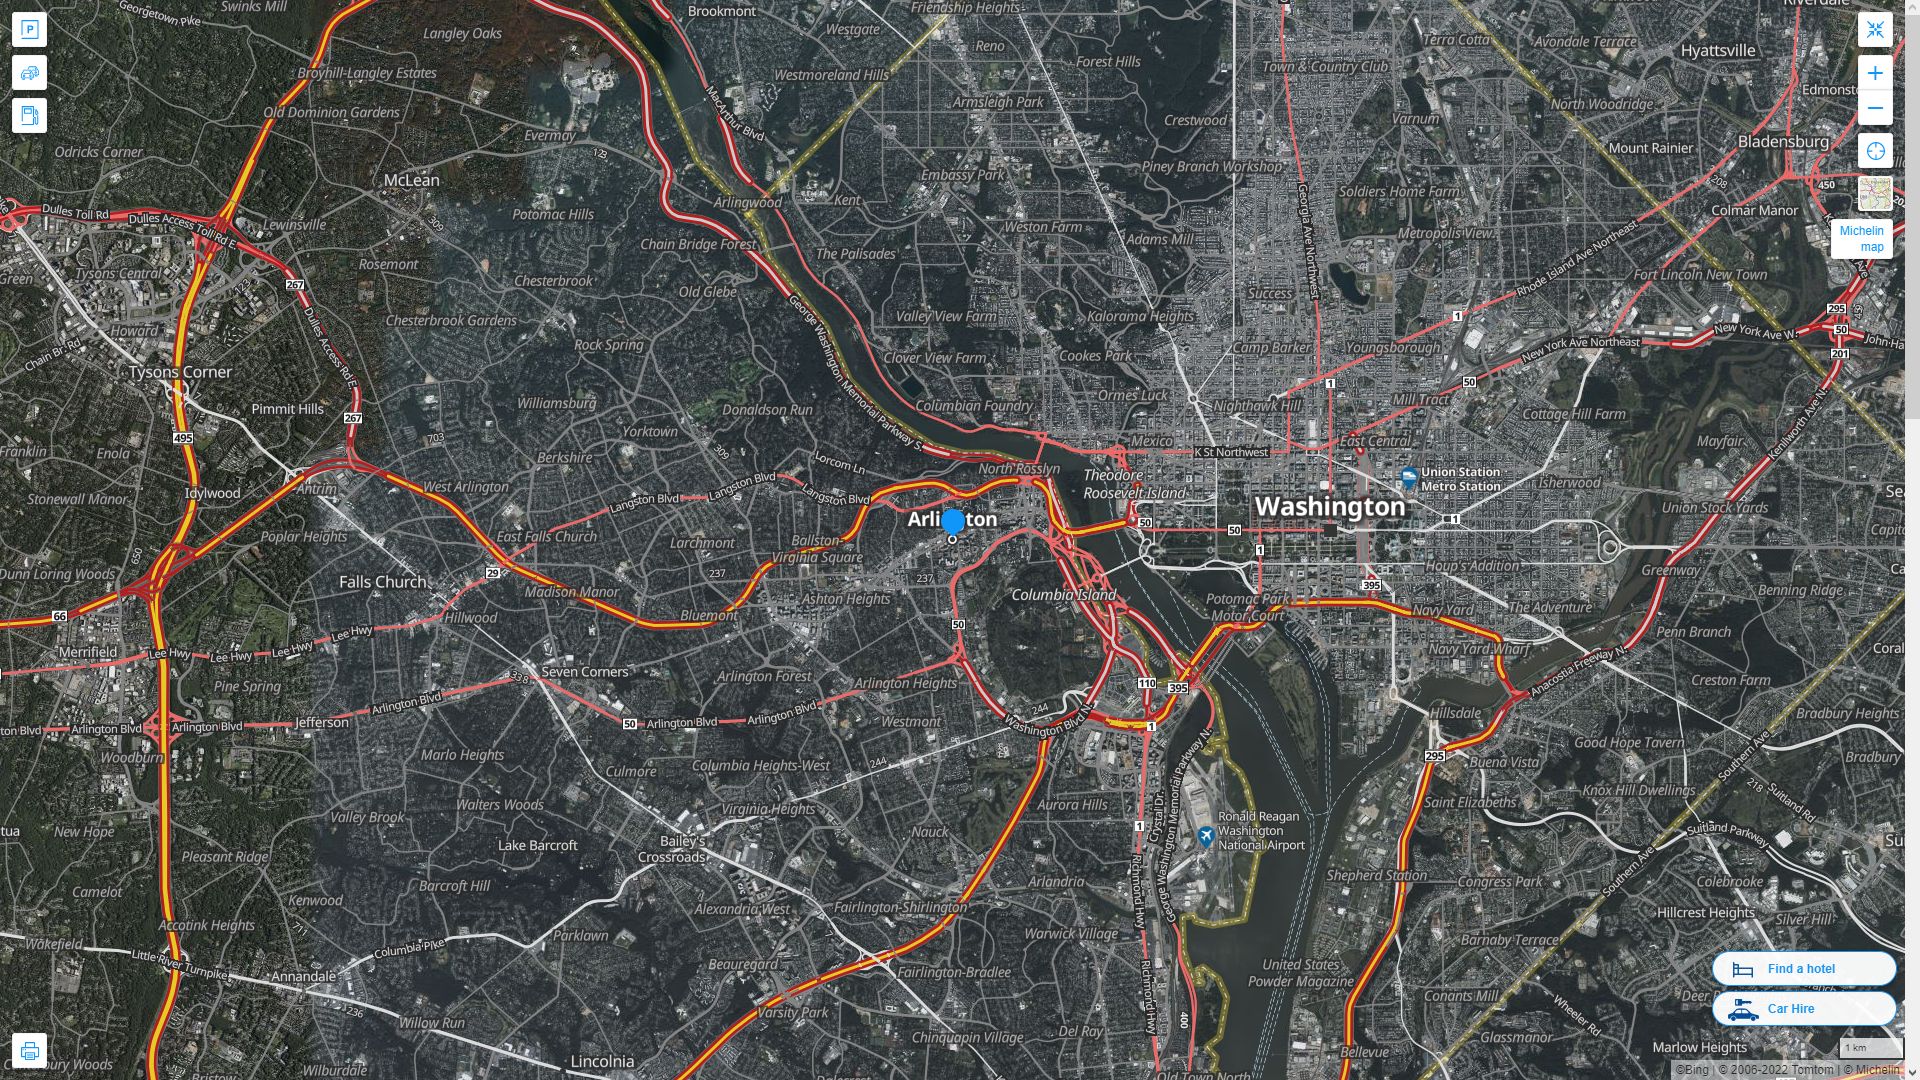 Arlington Virginia Highway and Road Map with Satellite View